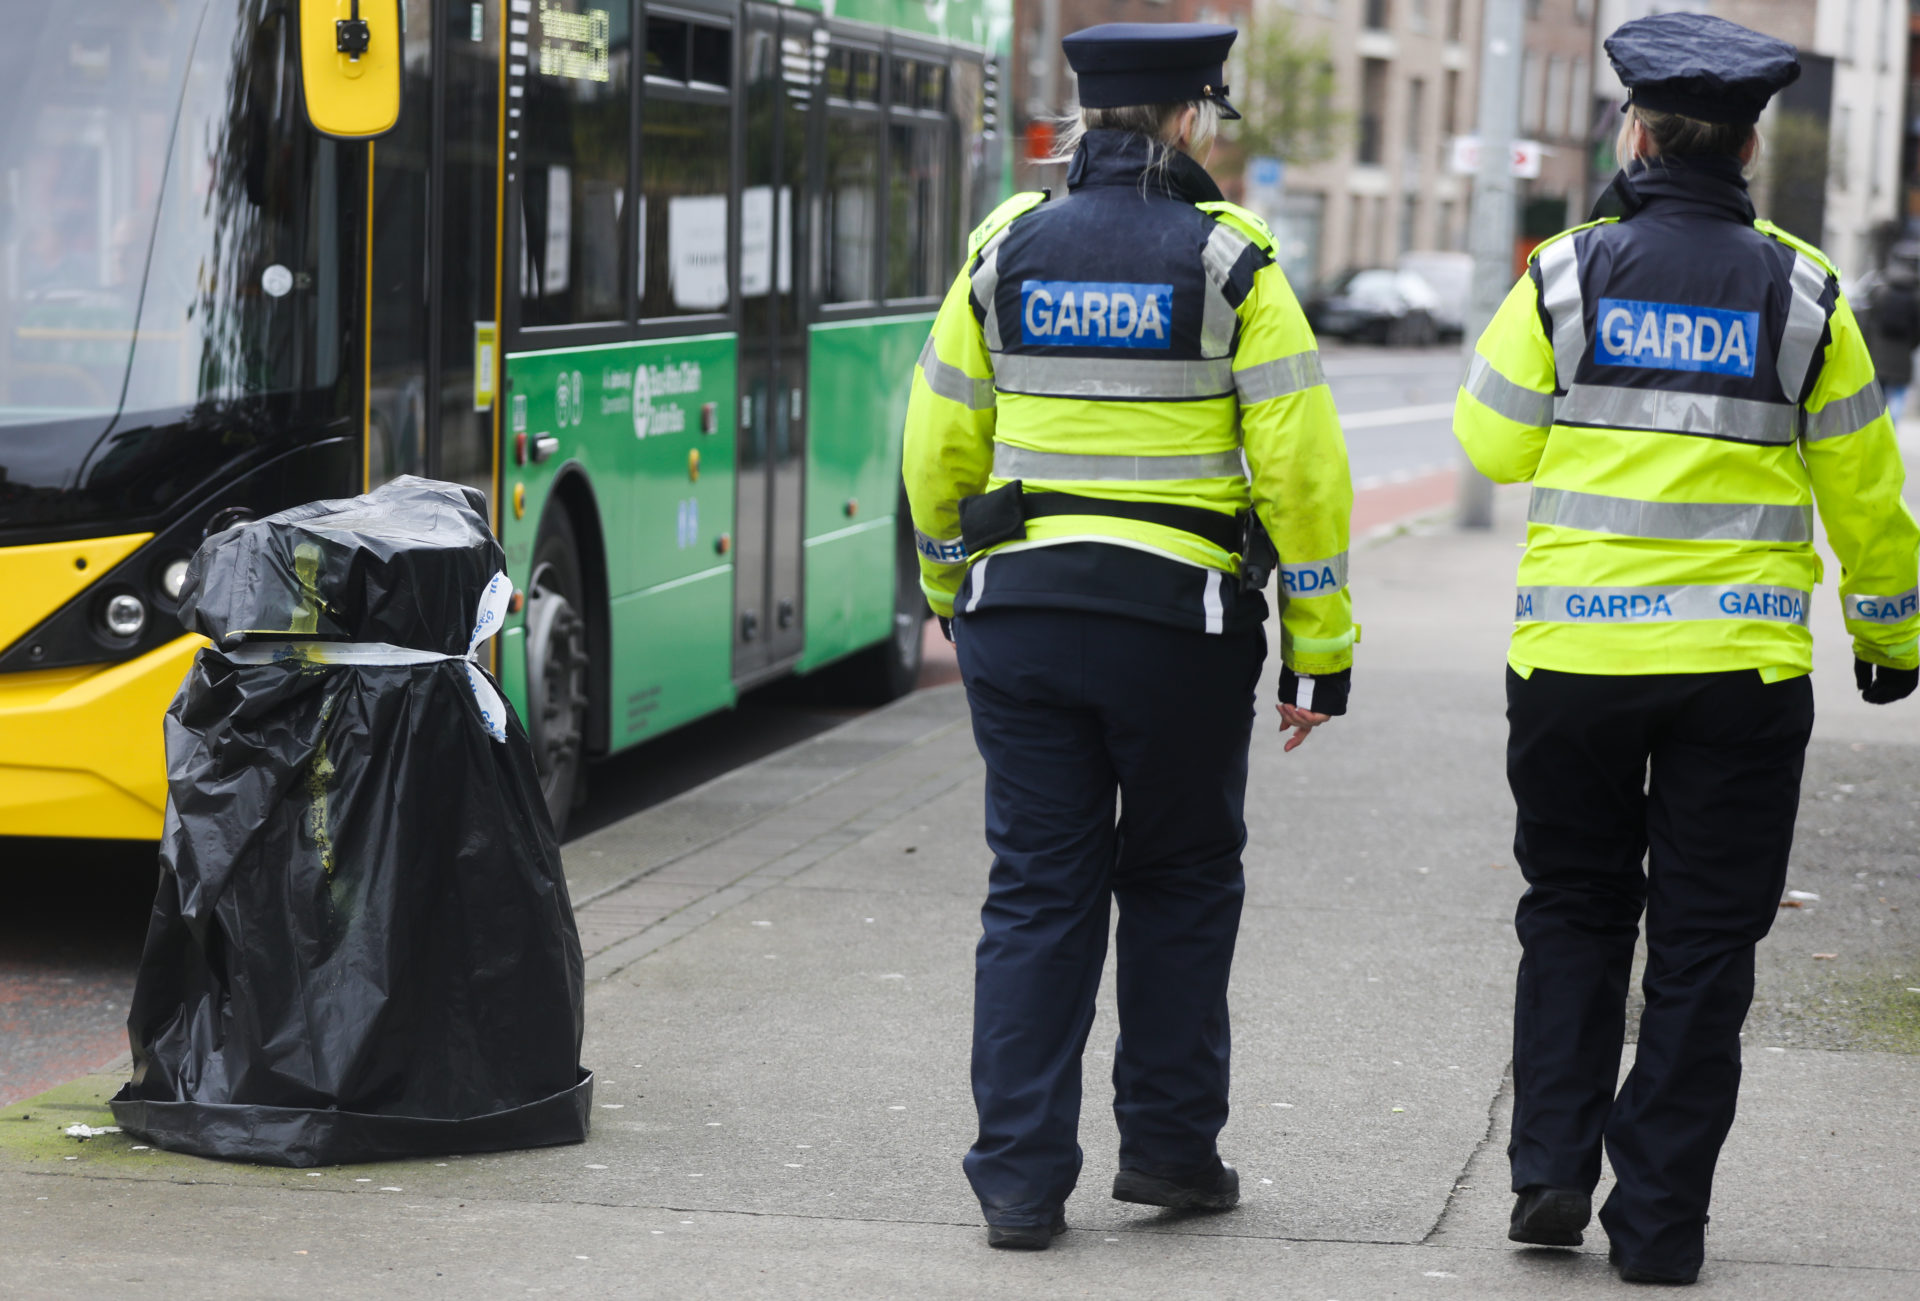 Gardaí passing a litter bin which has been taped closed as extra security precautions are put in place ahead of the visit of US President Joe Biden